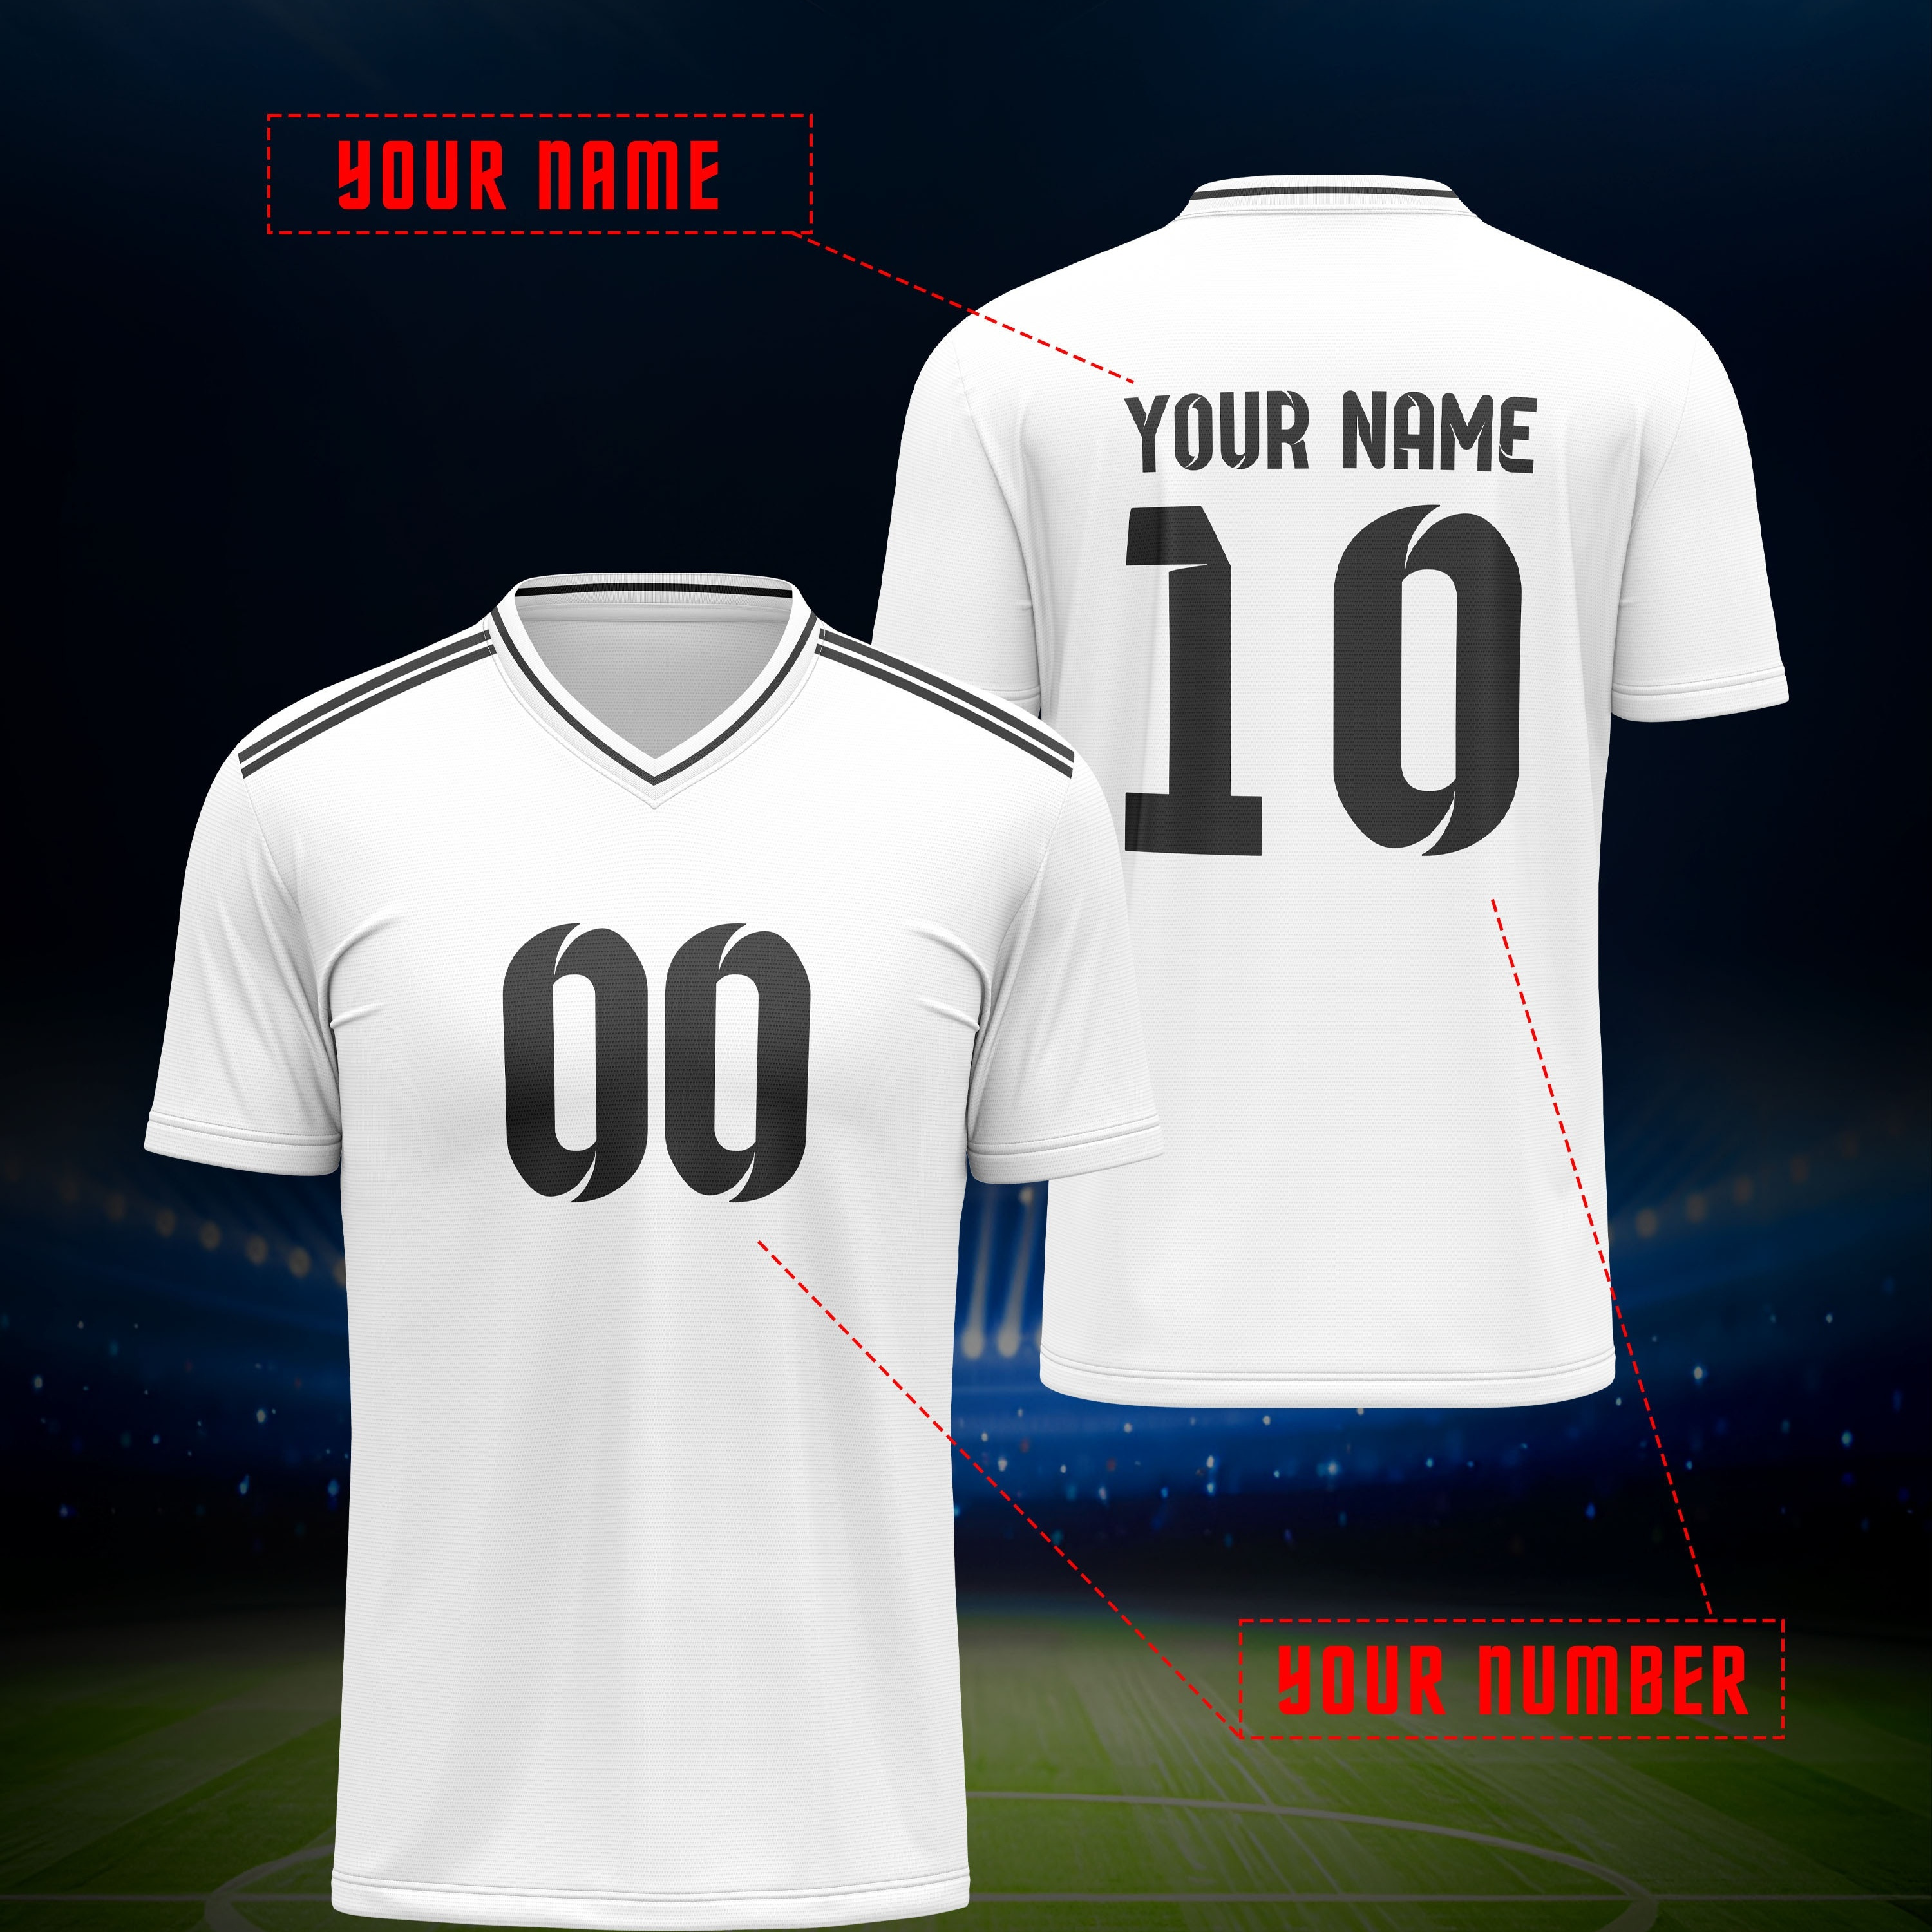 

Custom Name & Number V-neck Soccer Jersey - Breathable, Stretch Fabric For Training & Casual Wear, Perfect For Summer Parties & Outdoor Activities